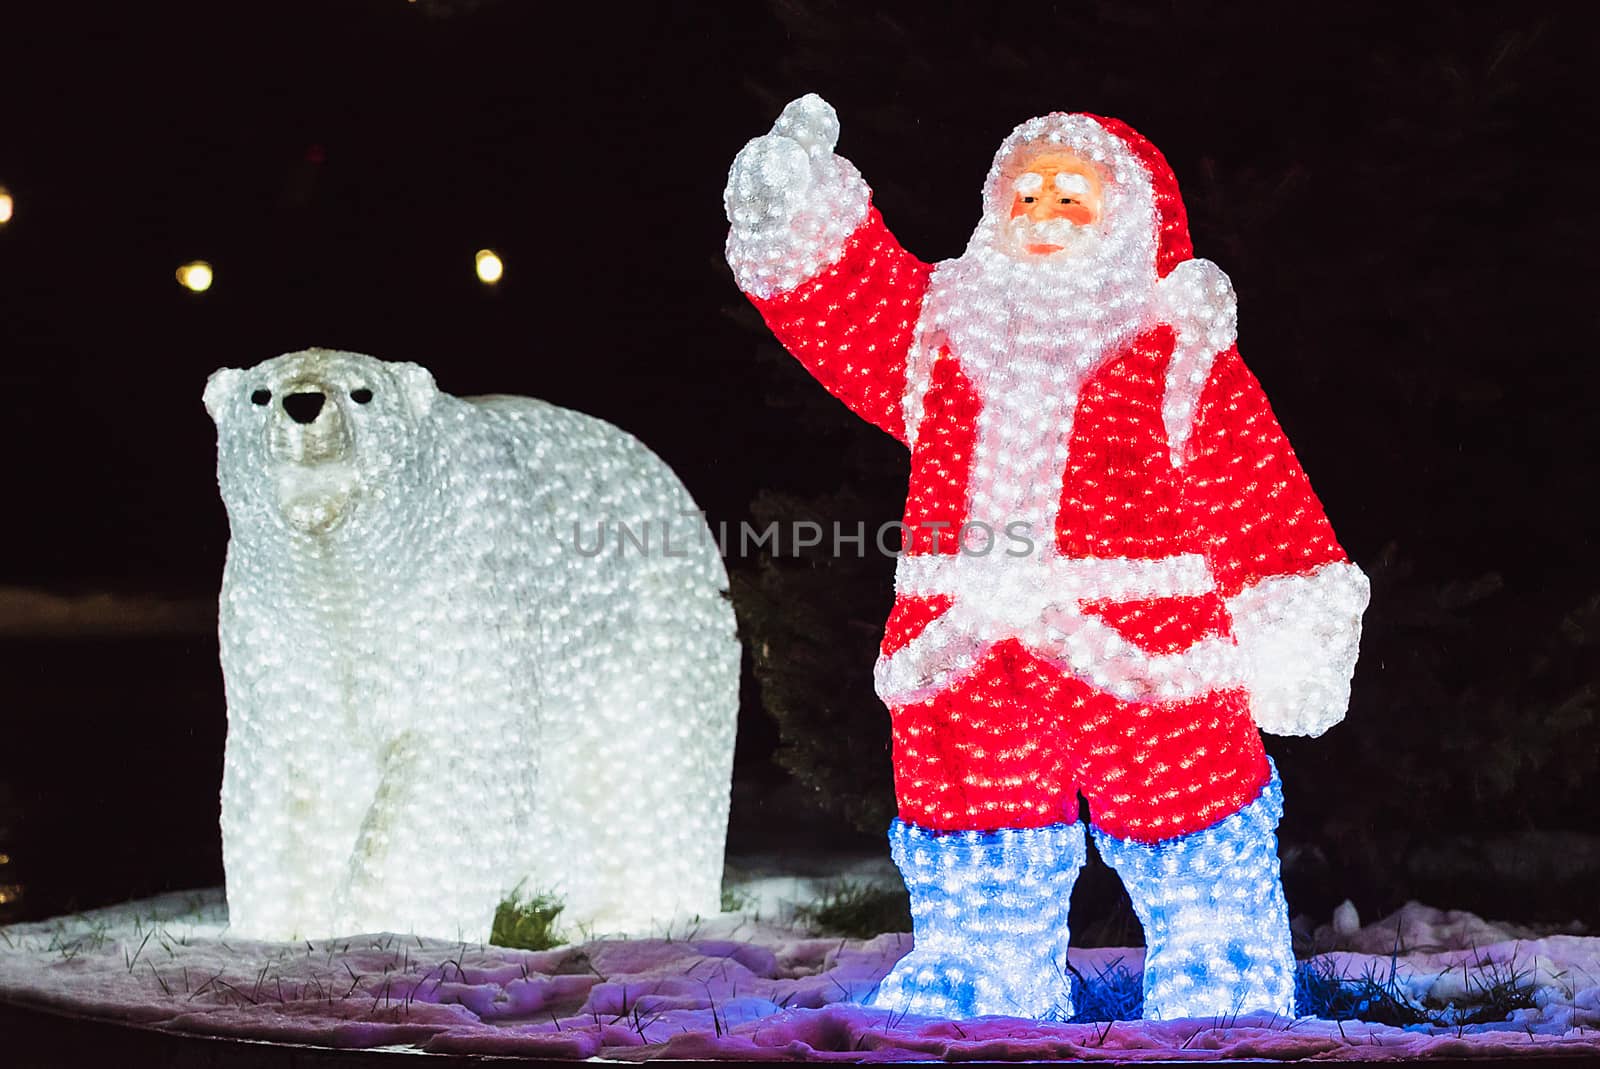 Glowing figures of Santa Claus and the bear